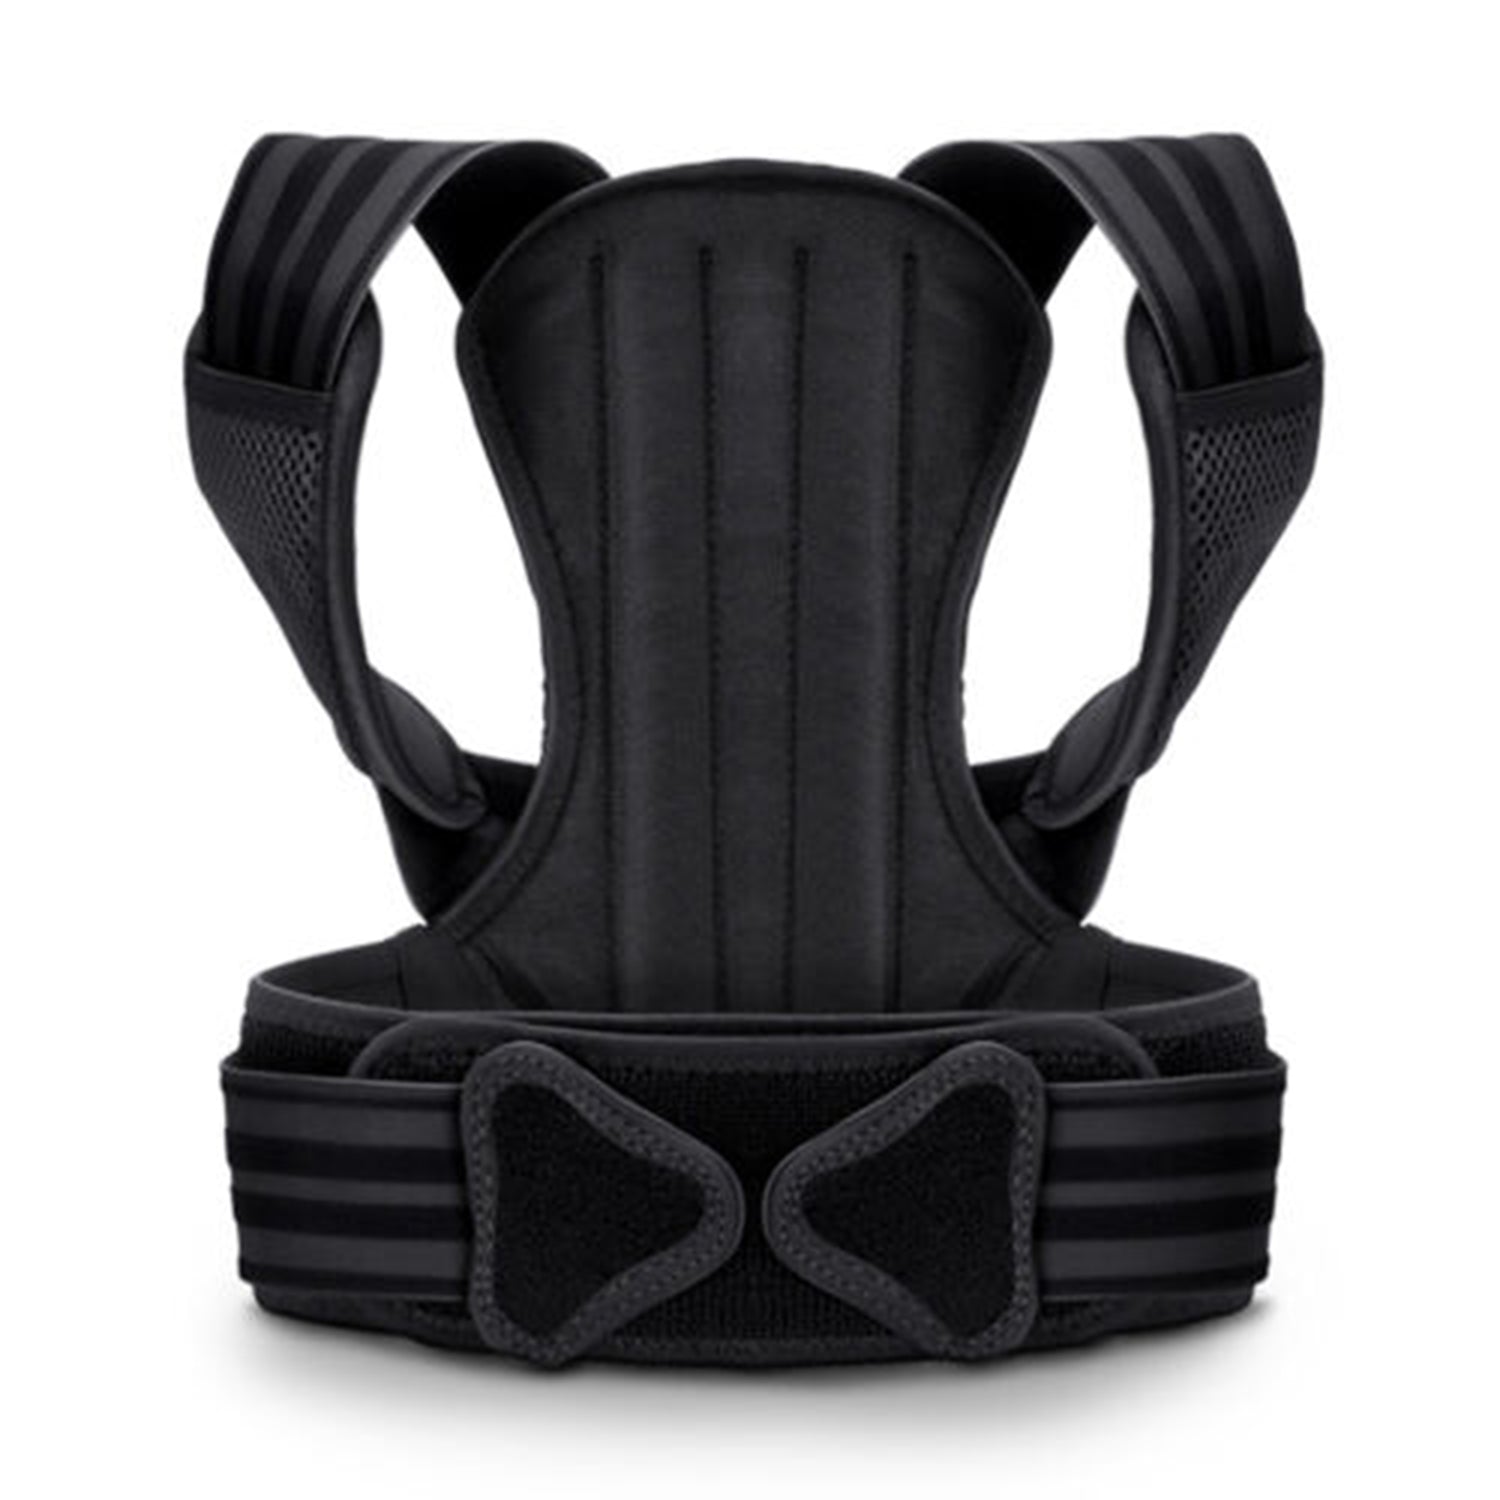 Lumbar Support Belt Spine Brace Posture For Lower Back Pain Relief